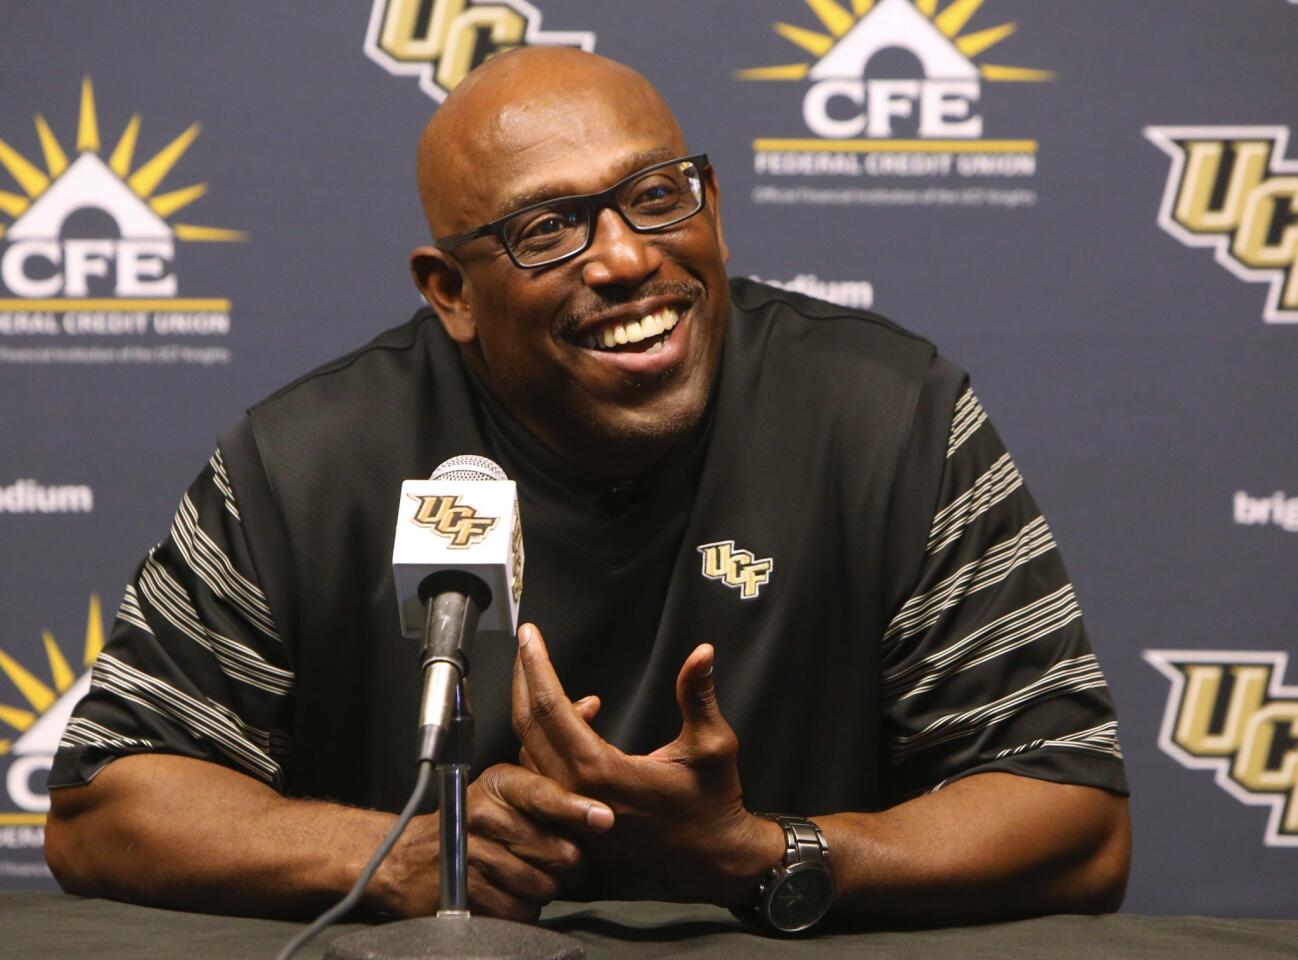 One-time UCF interim coach Danny Barrett comes to the Dolphins from the CFL.